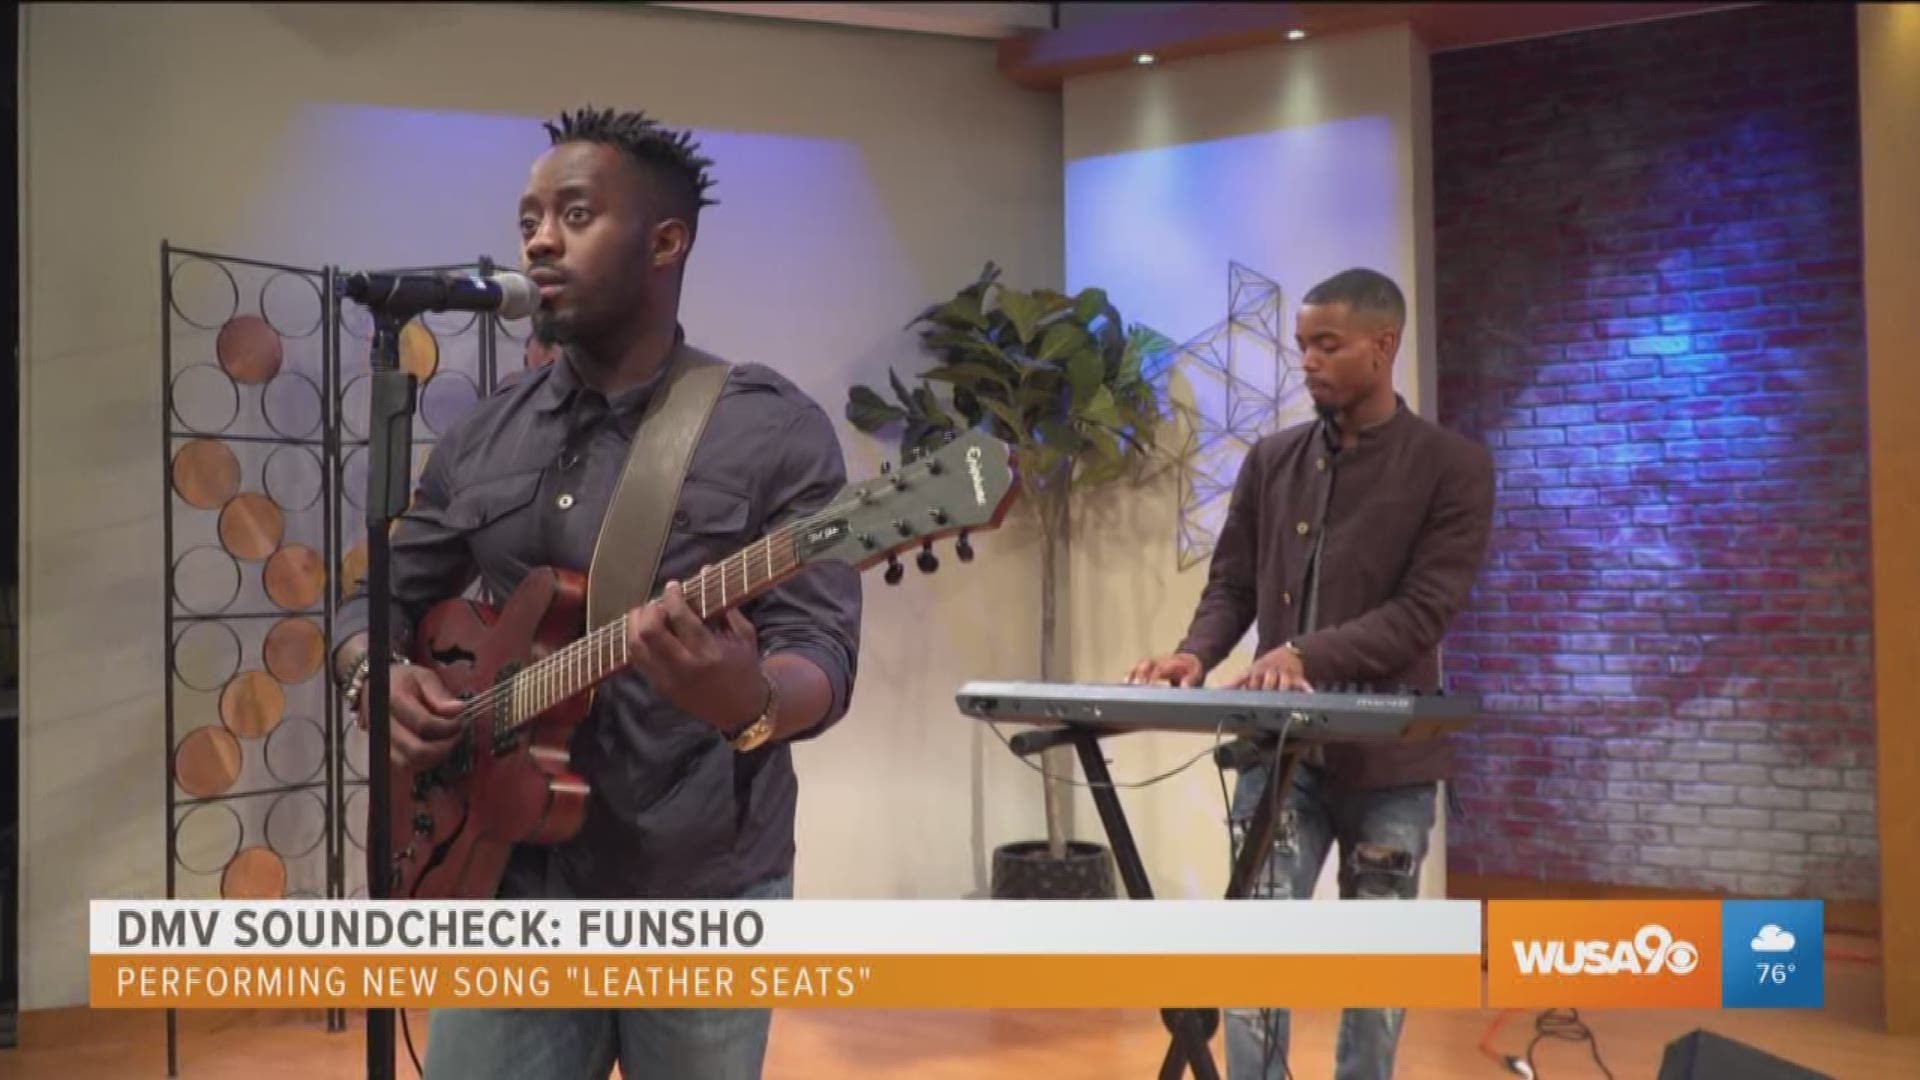 Funsho grabbed the attention of each judge on NBC's The Voice as a contestant. Now, he grabbed the attention of Great Day performing his new song "Leather Seats" from his EP. Catch him live as he will be performing at Song Bird June 24.